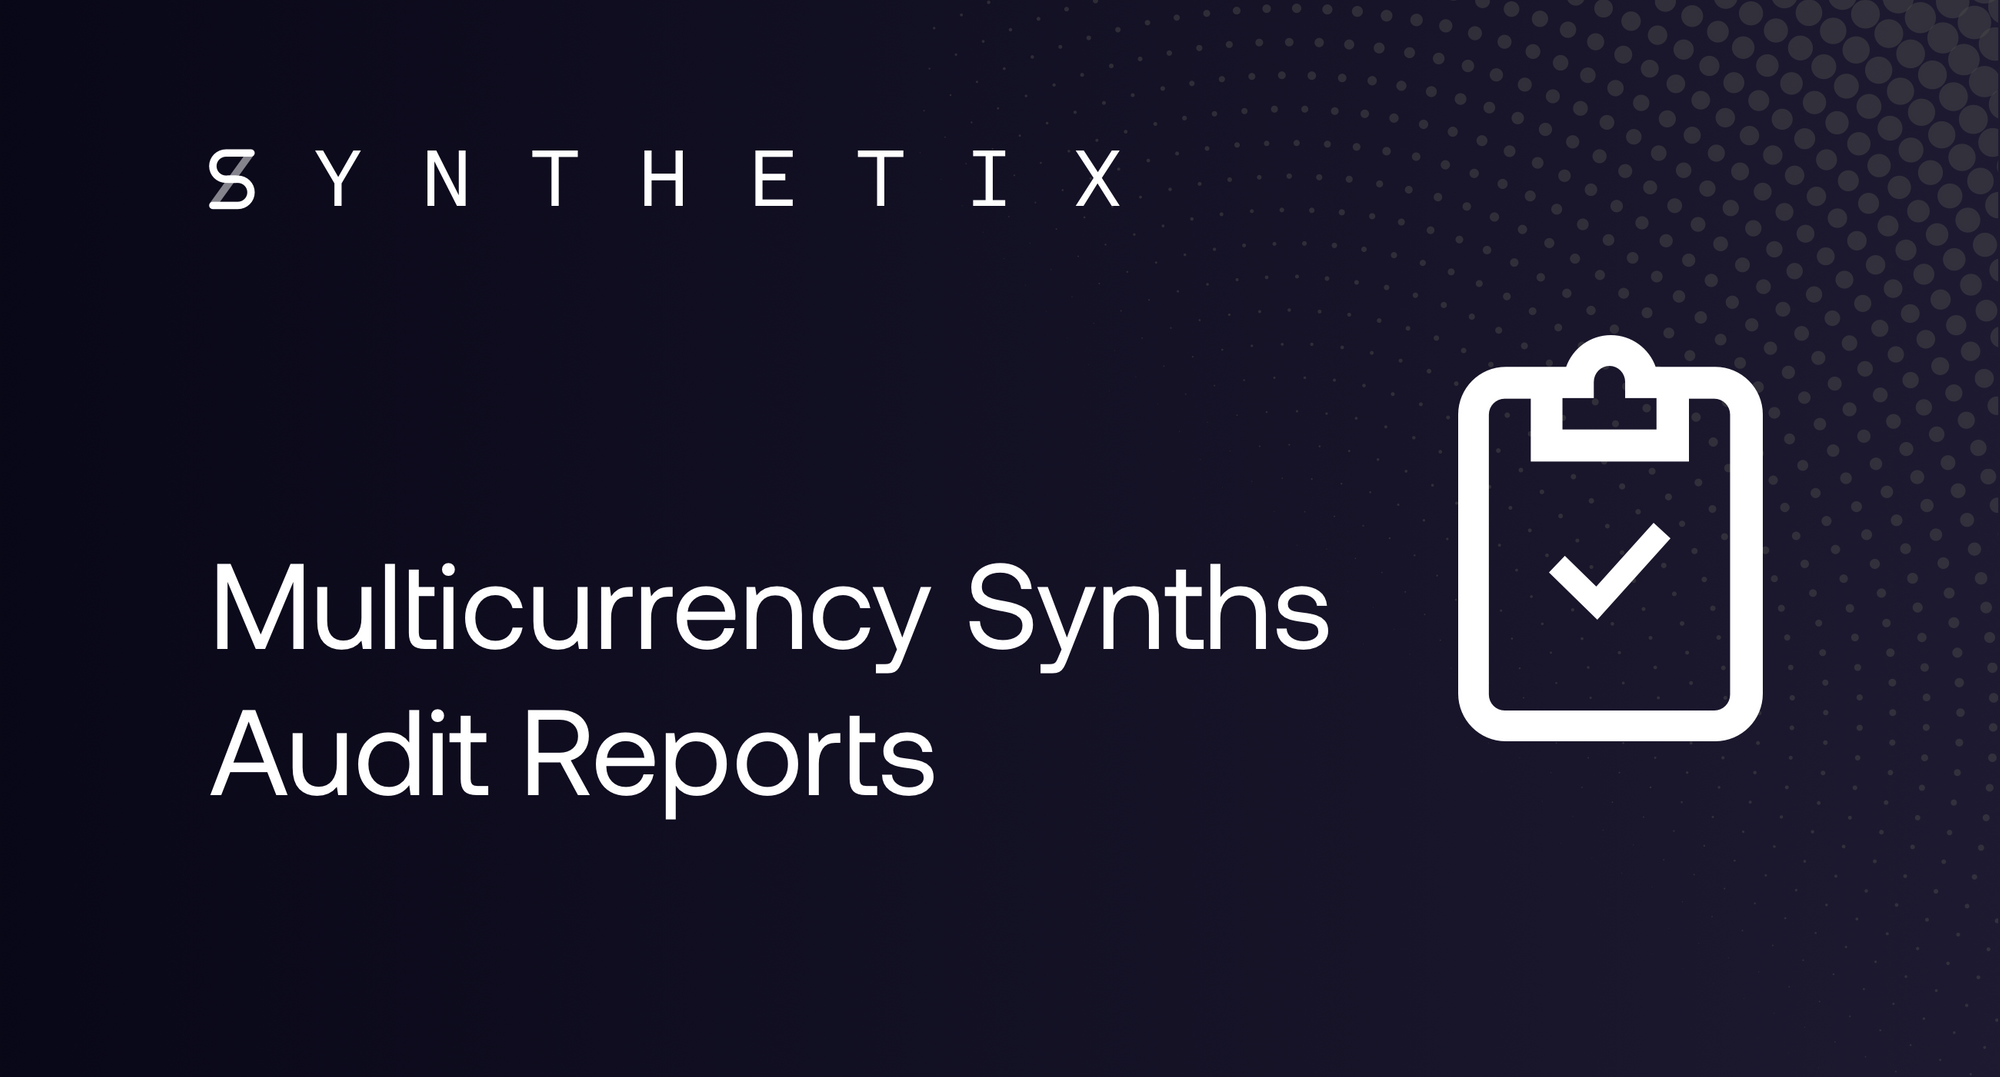 Audit: no security vulnerabilities found in Multicurrency Synth contracts